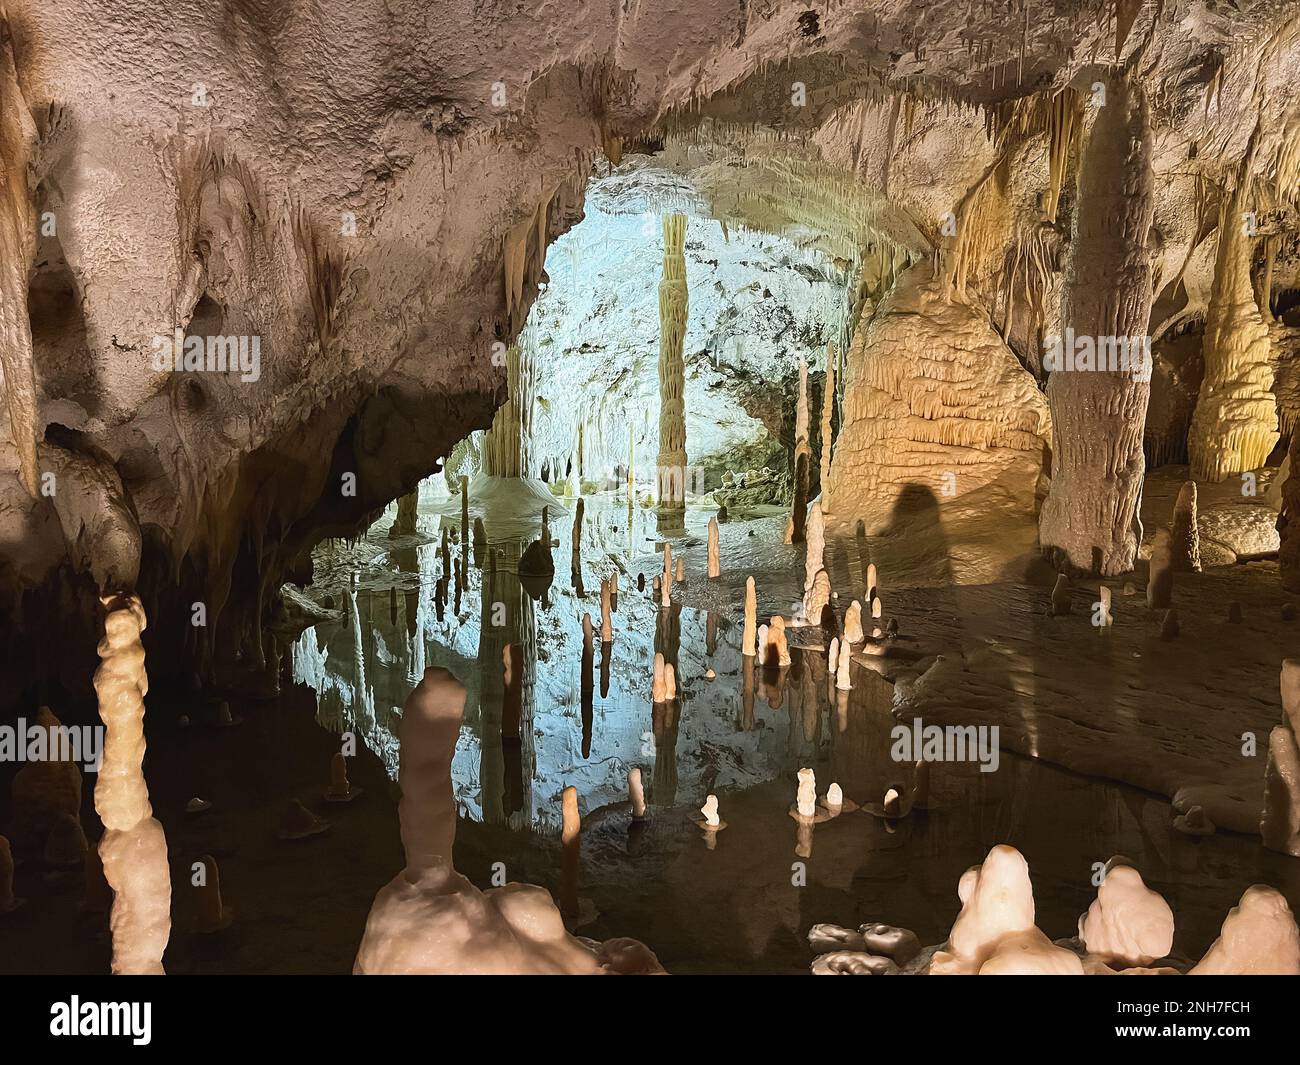 Inner Lake in Karst Cave with Stalactites and Stalagmites. Limestone Formations, Natural Beauty Landscape Stock Photo